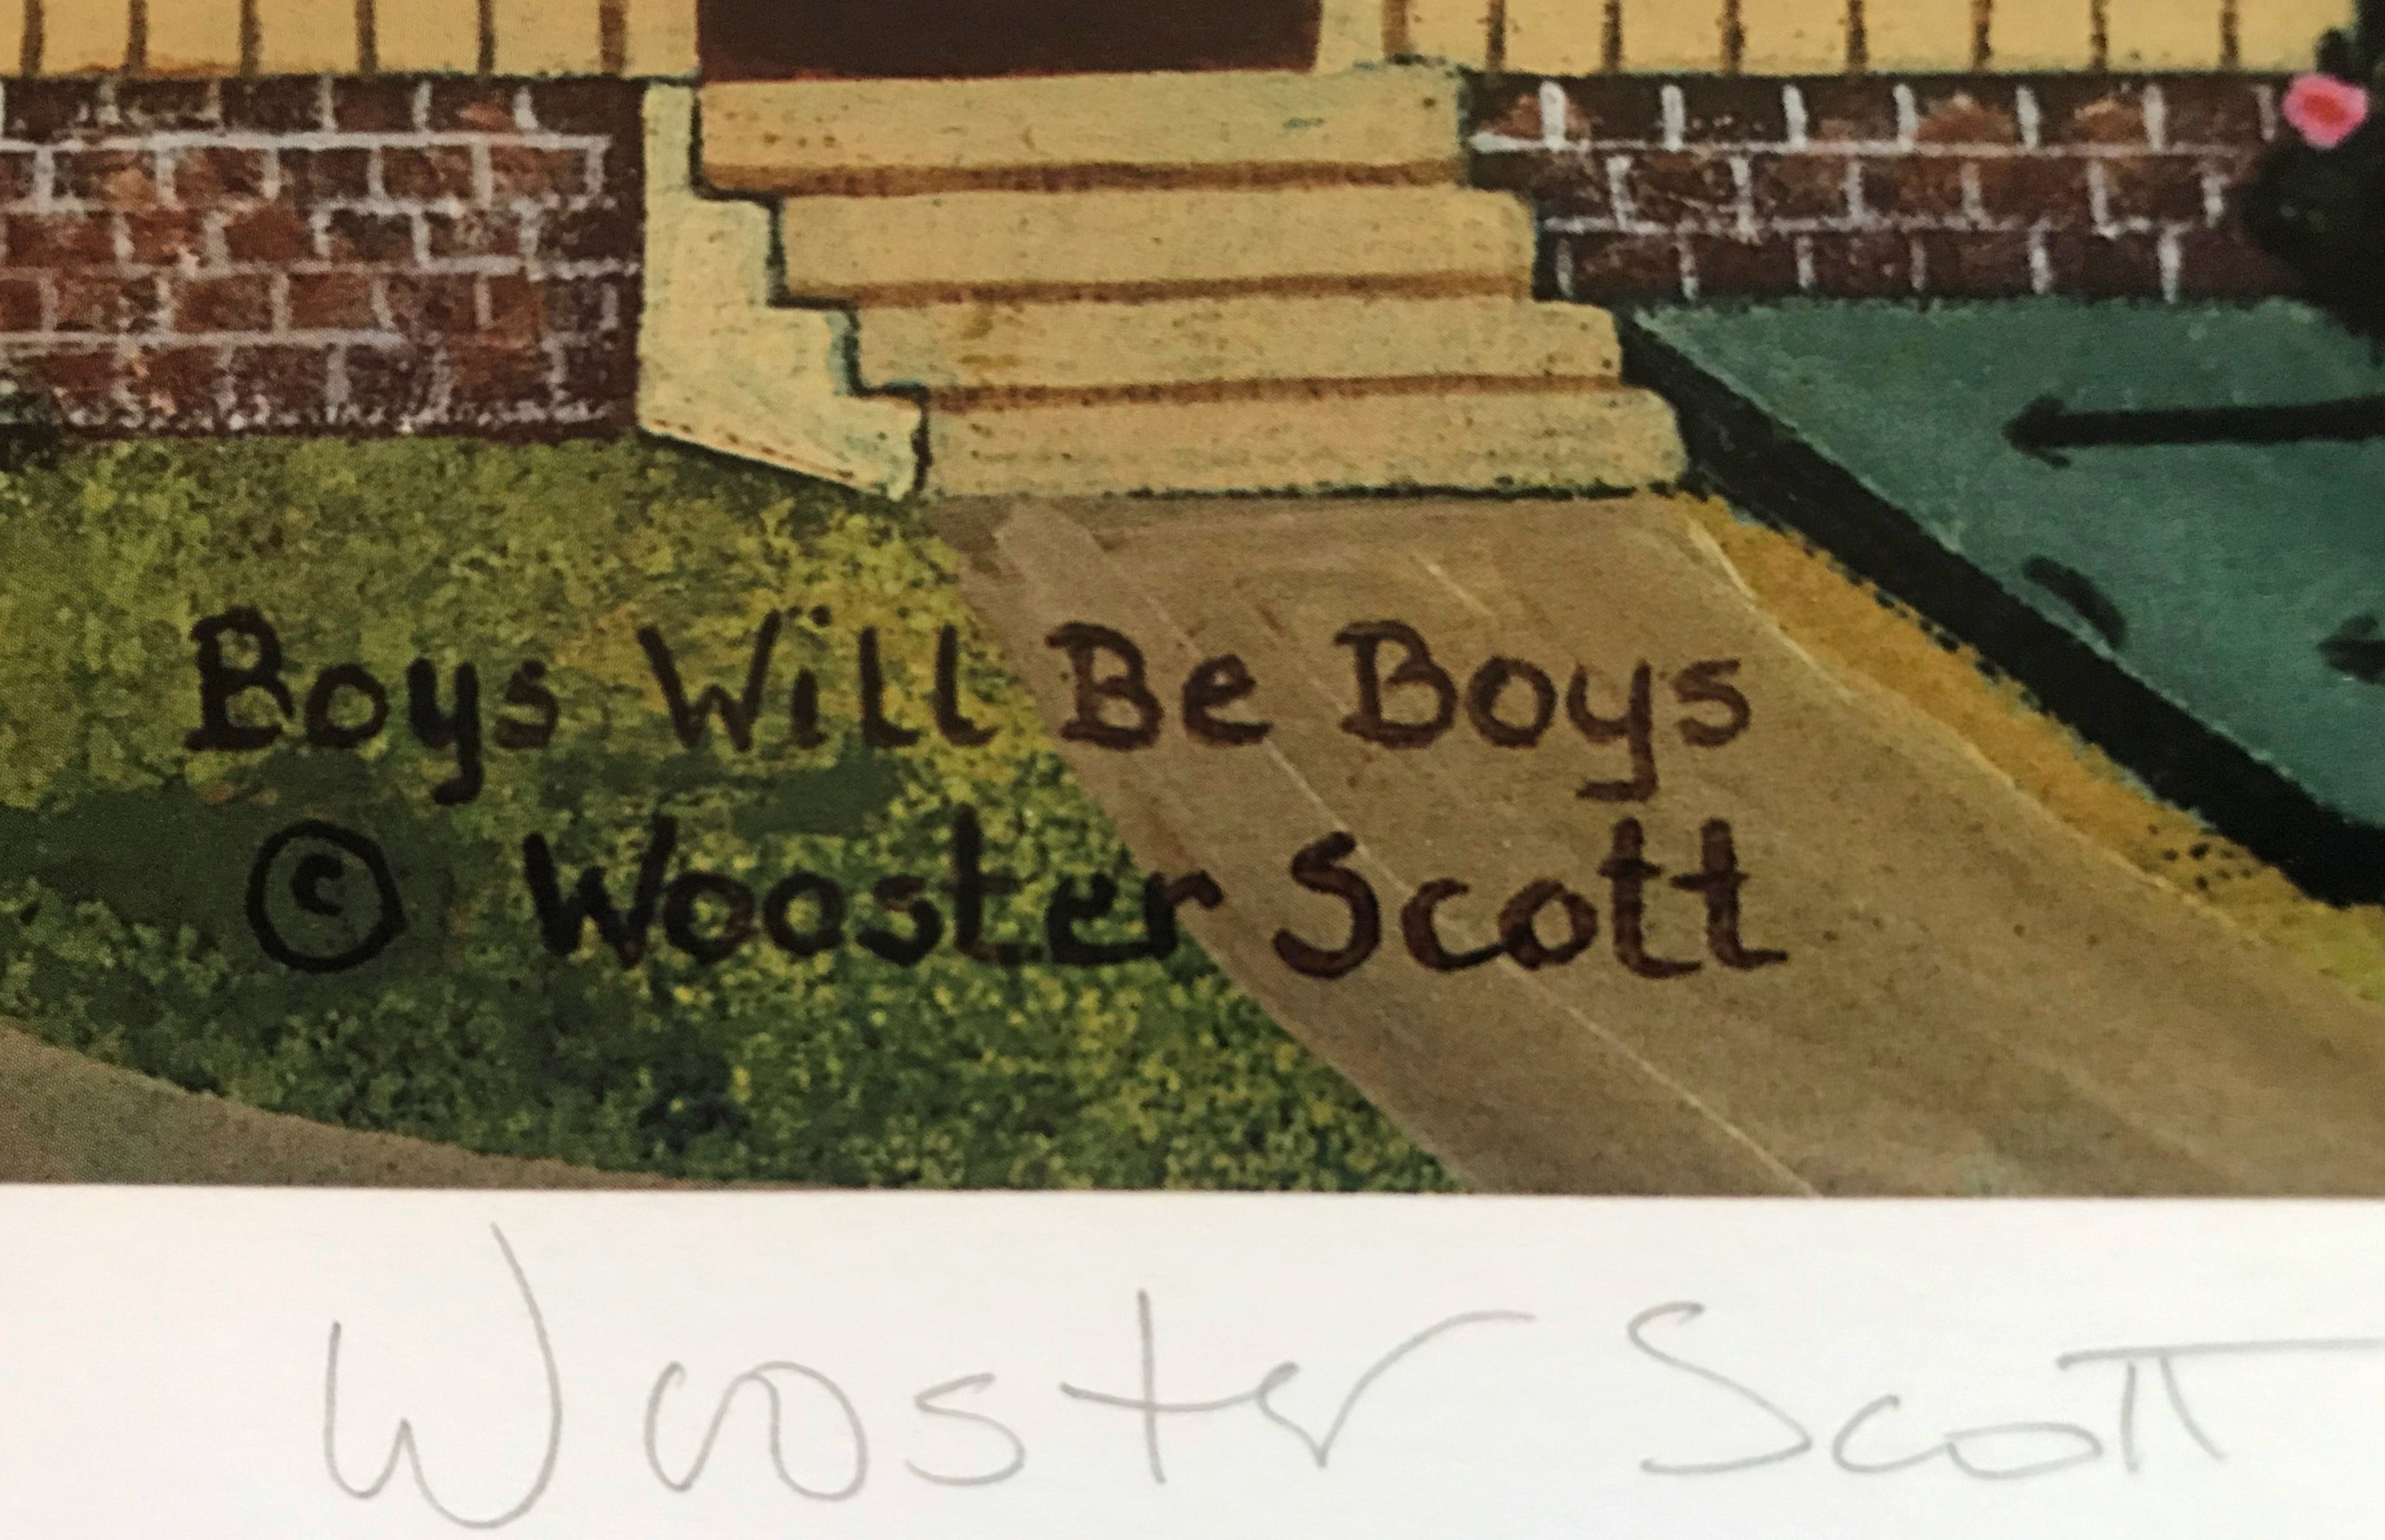 Boys Will Be Boys Jane Wooster Scott Lithograph Print Artist Hand Signed and Numbered